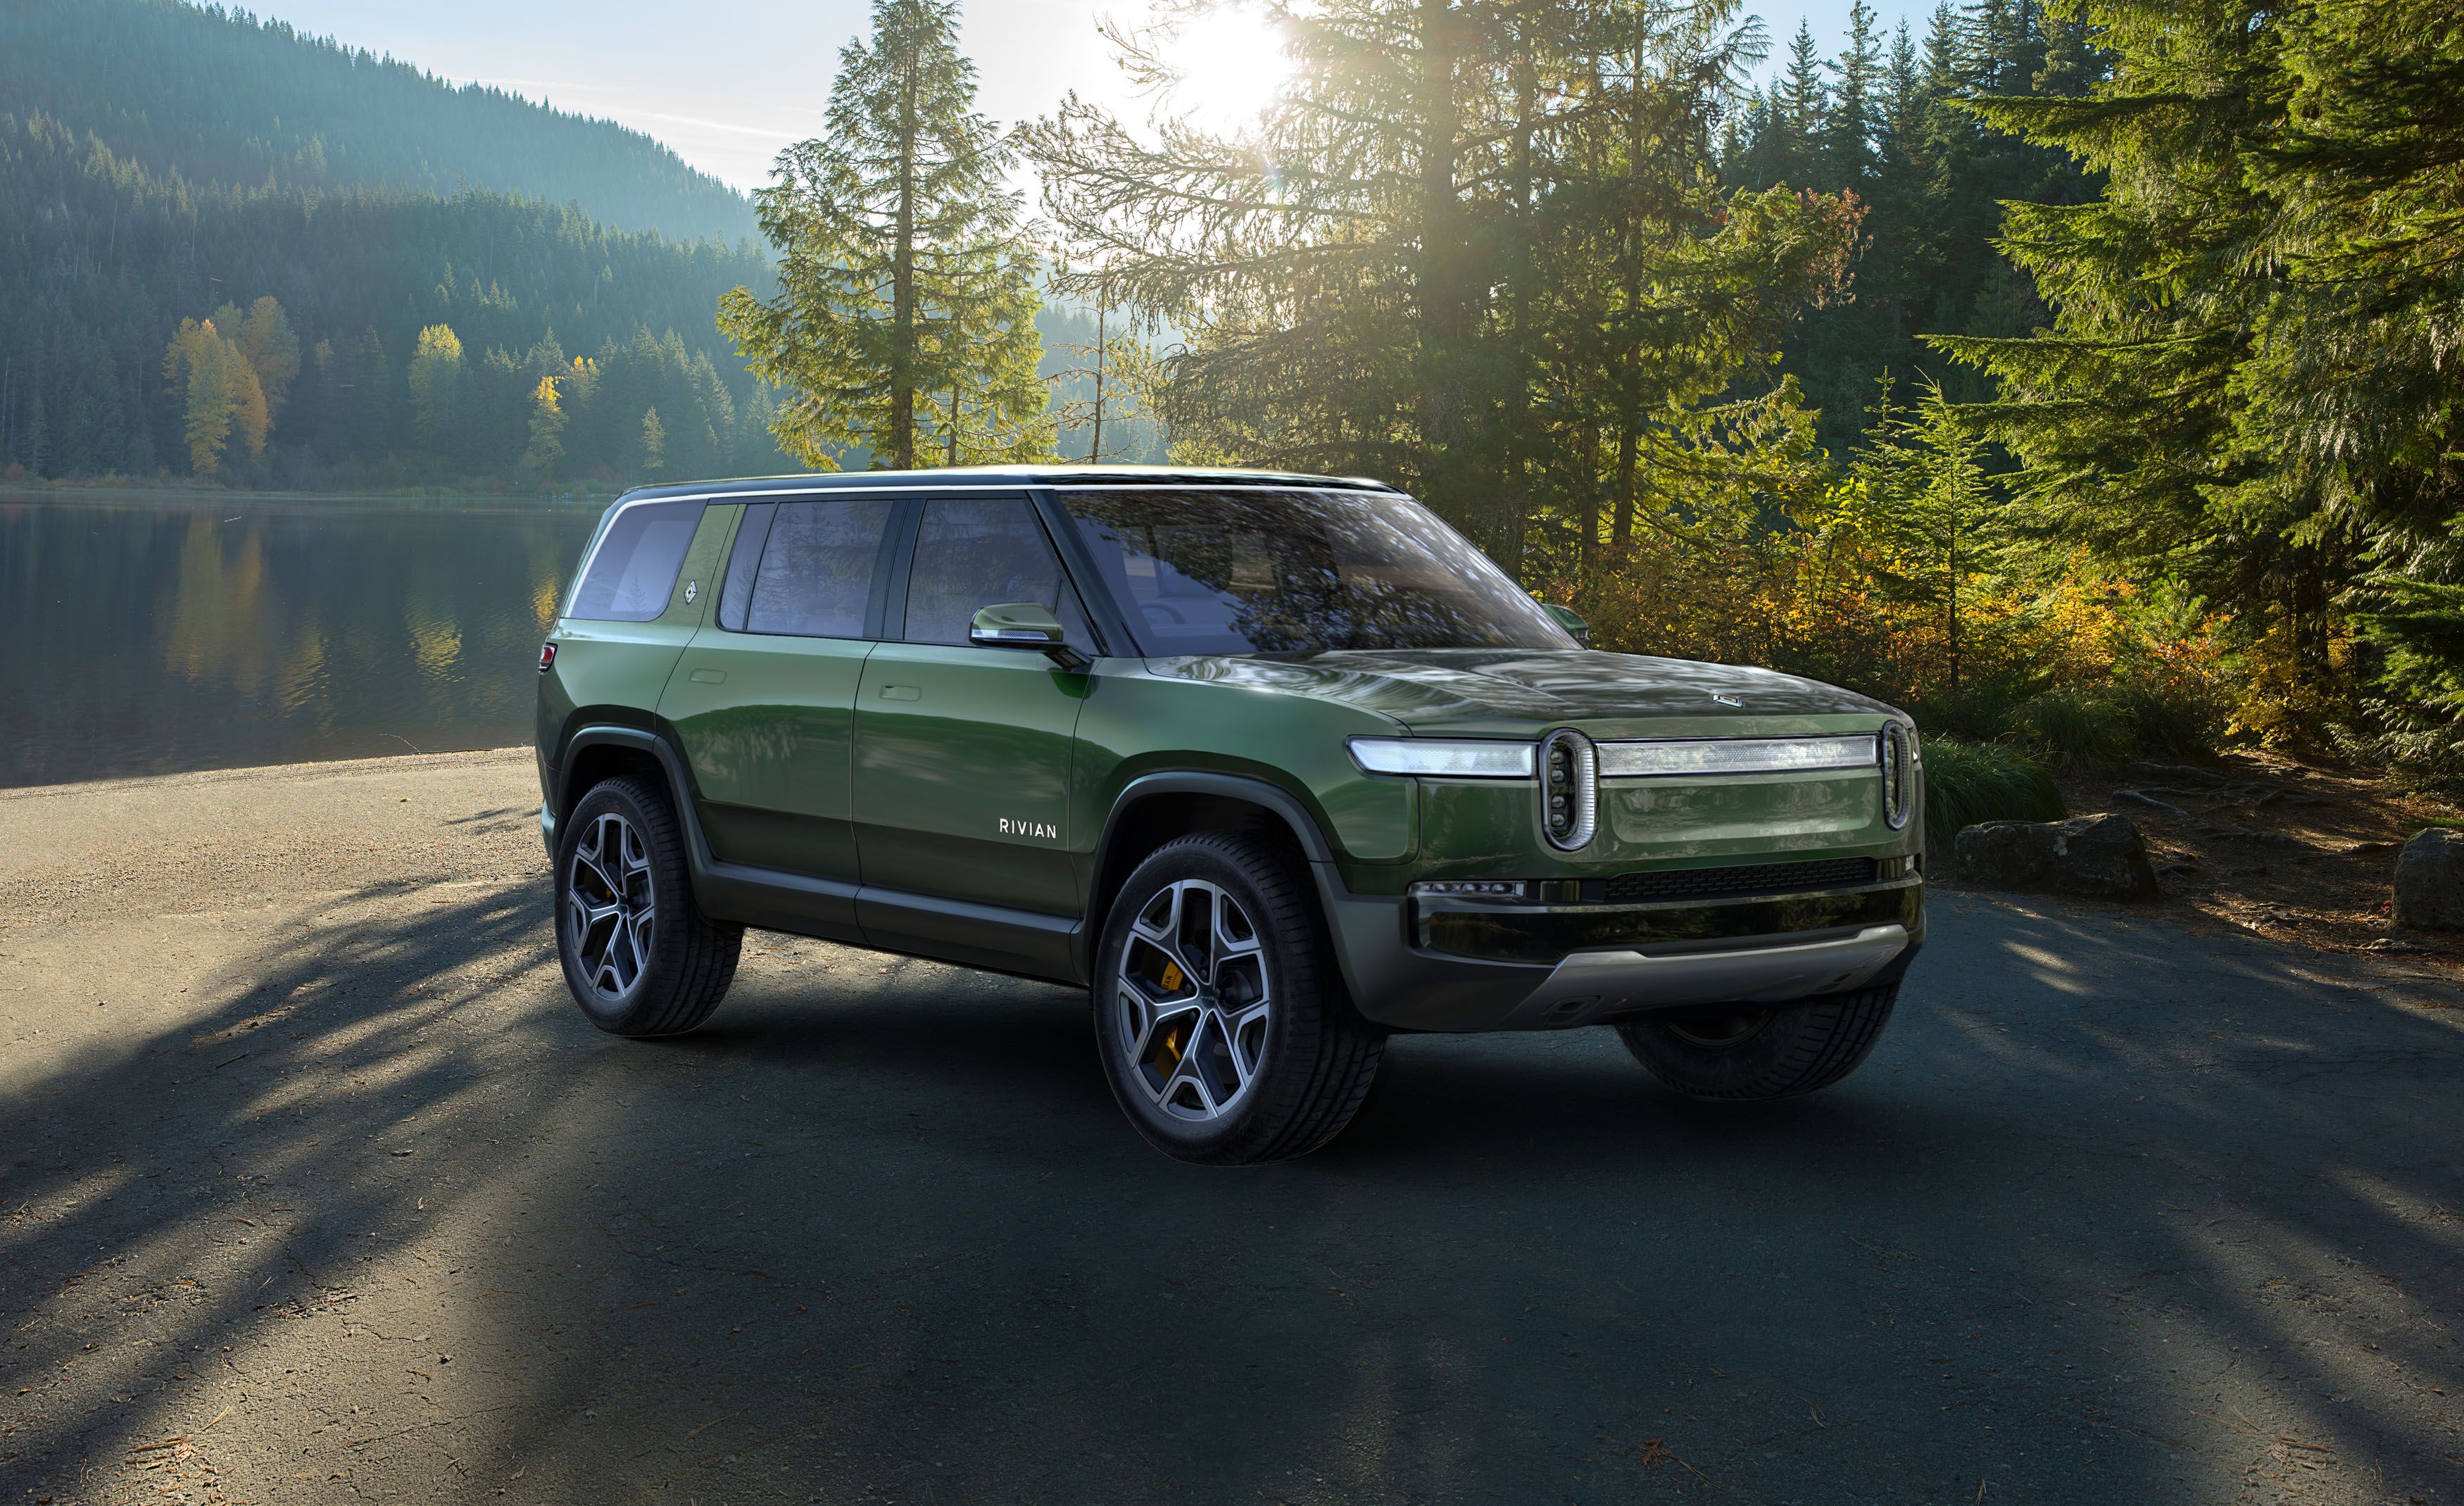  2022  Rivian R1S SUV  Specs Details and Release Date